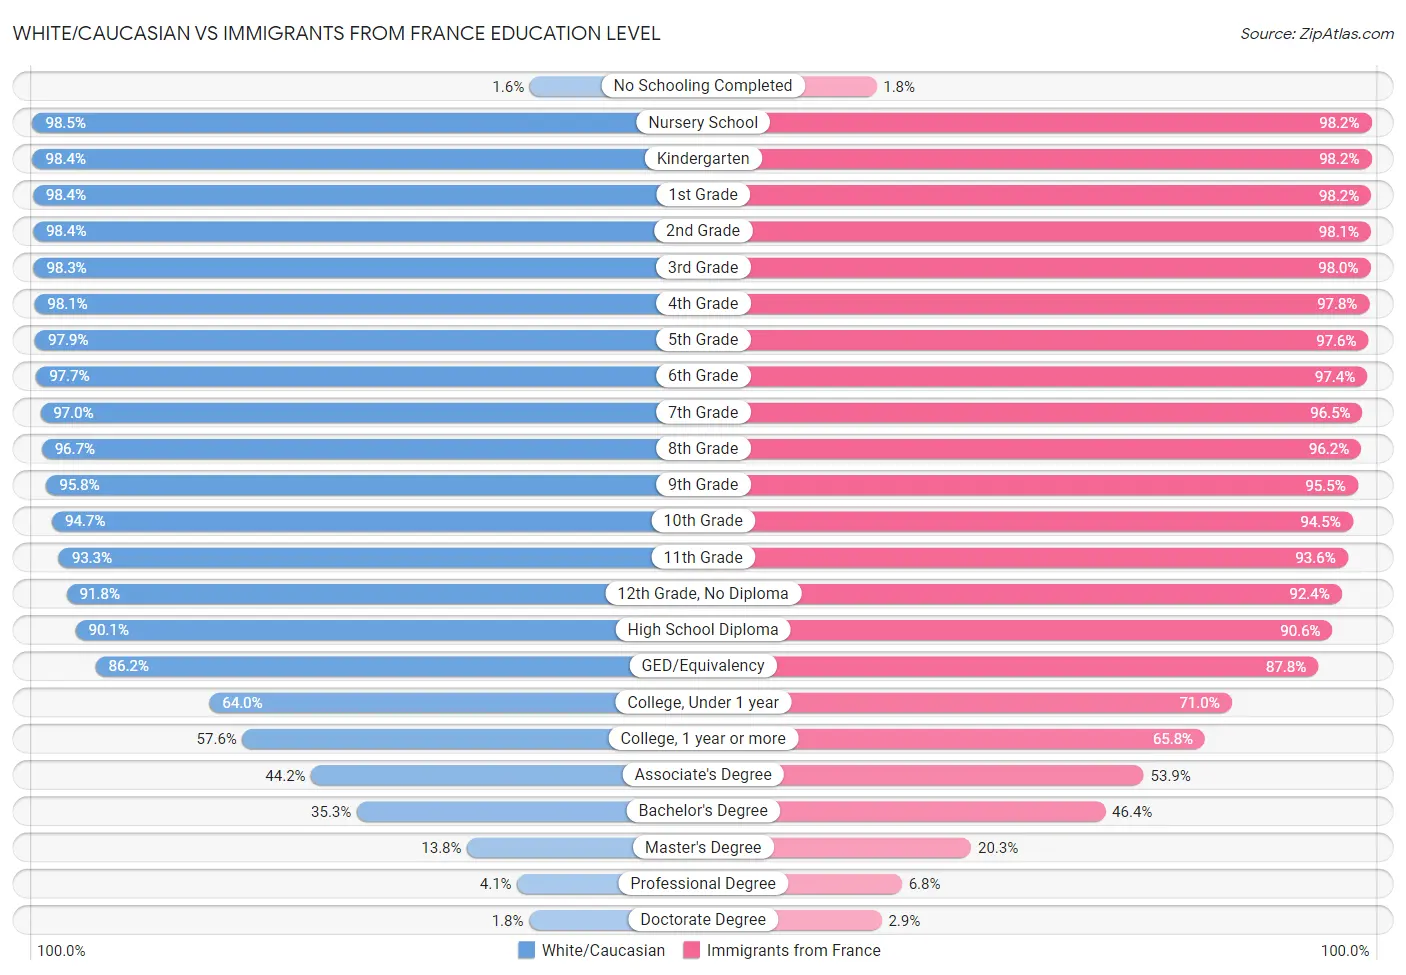 White/Caucasian vs Immigrants from France Education Level